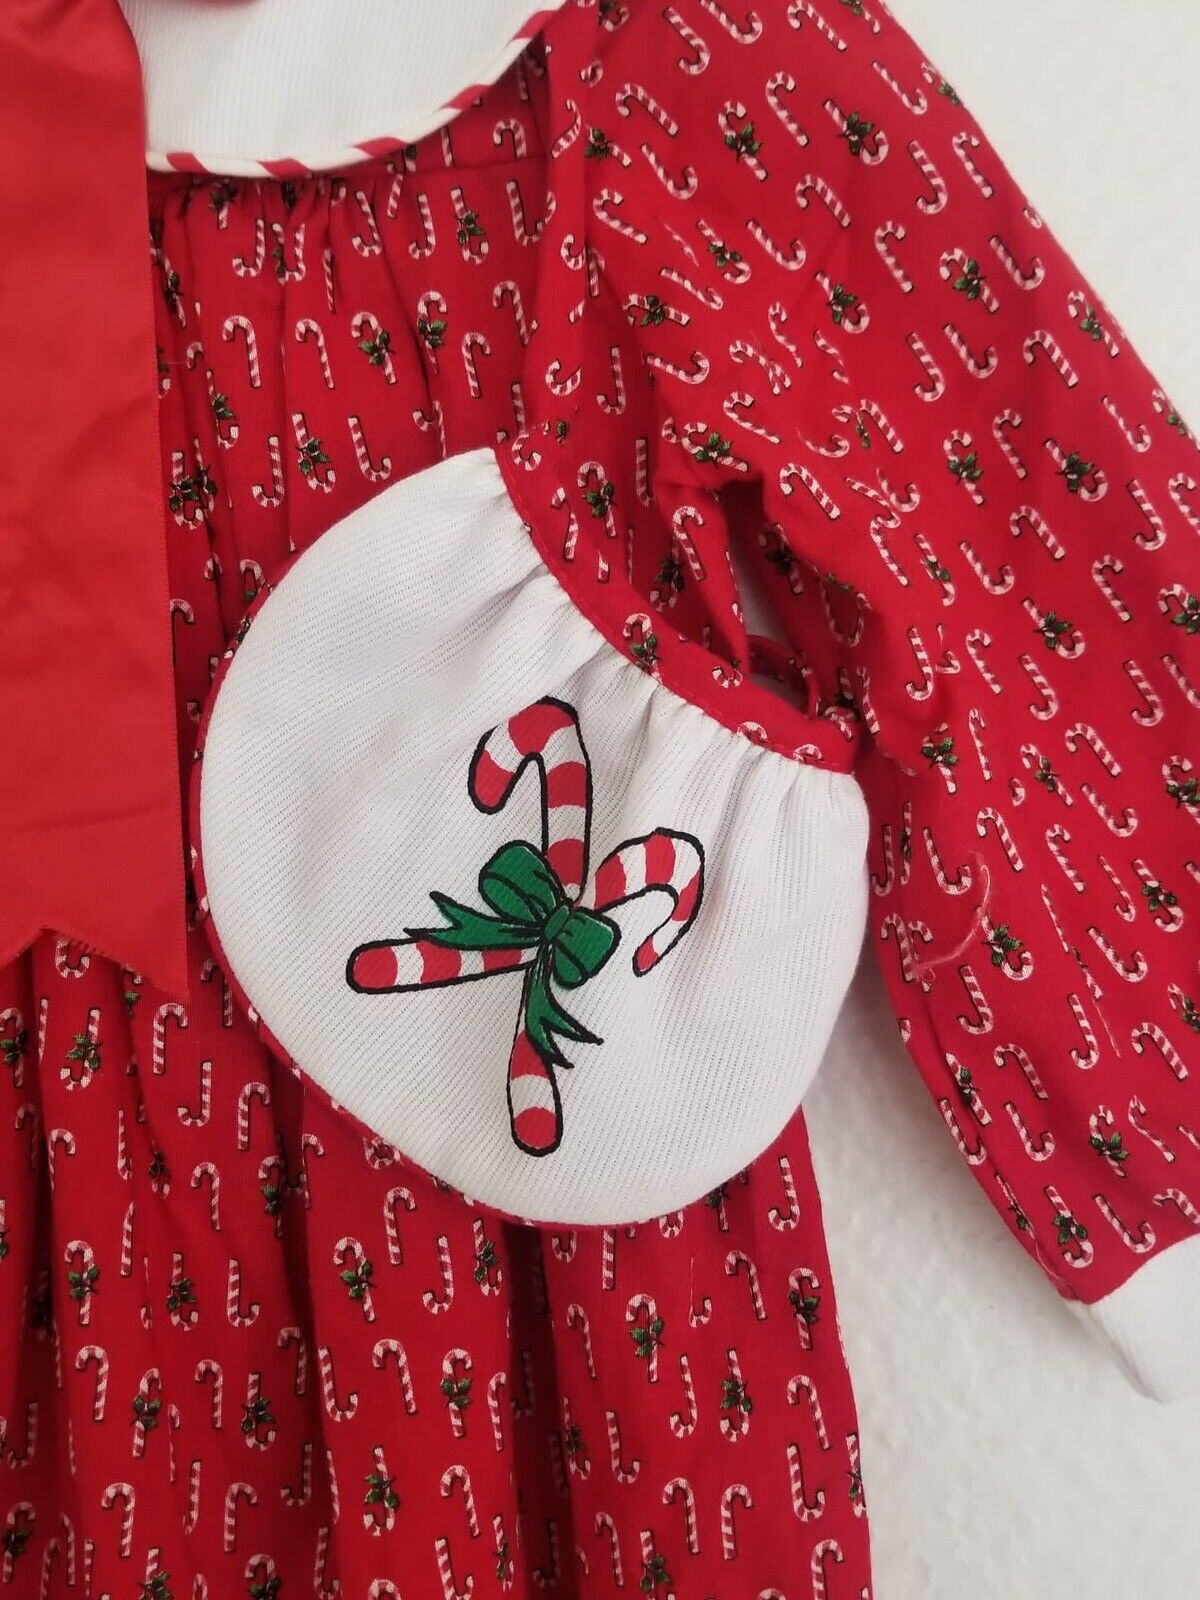 Vintage 1980s Rare Editions 2T Christmas Dress - Red Candy Cane Embroidery, USA Made - TreasuTiques